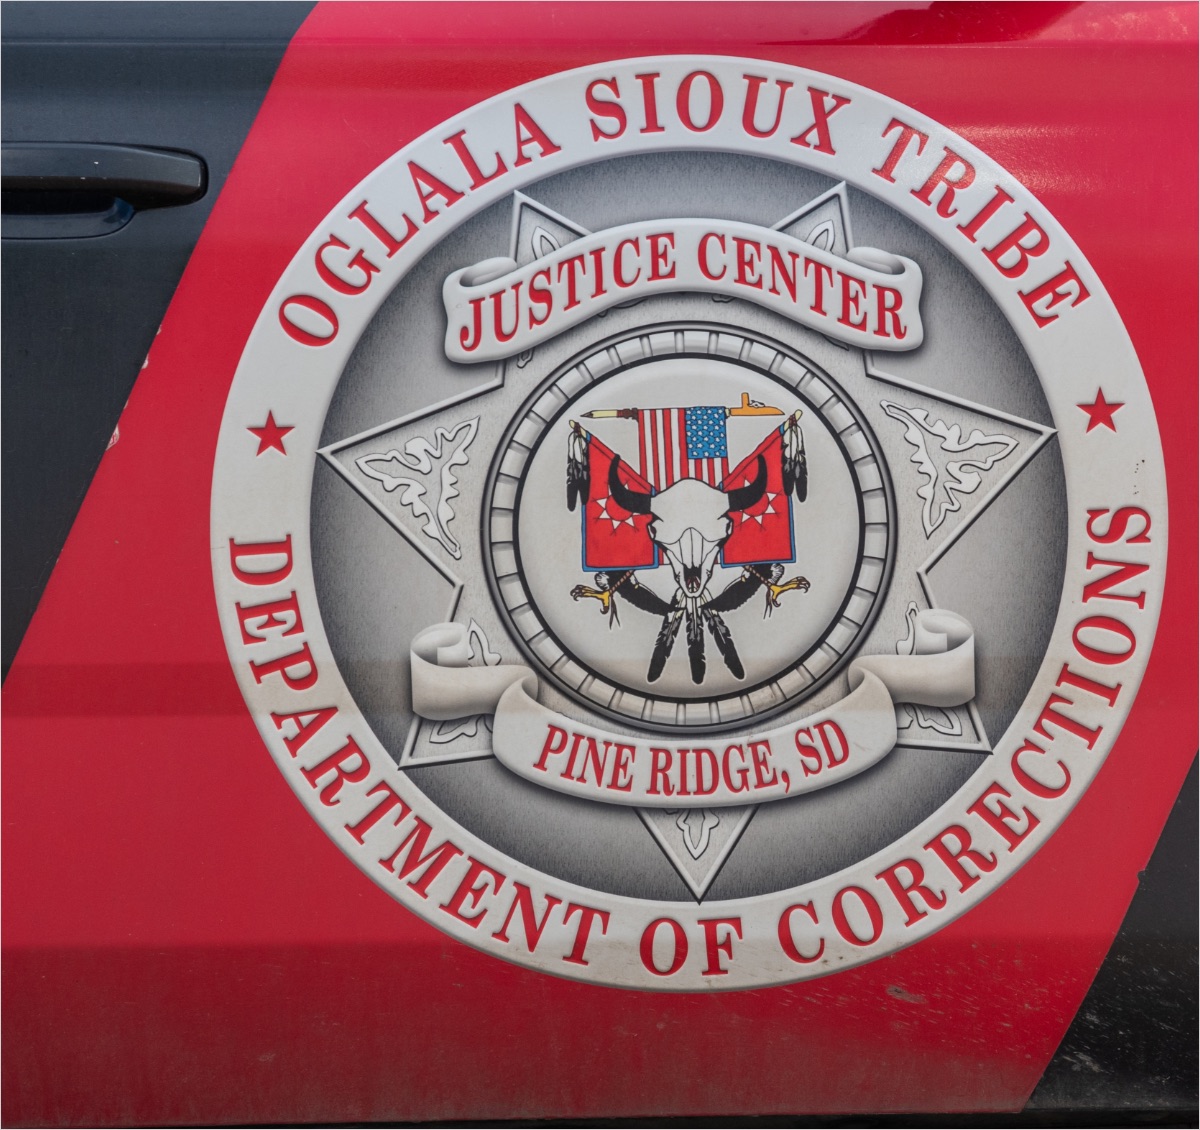 Oglala Sioux Tribe Department of Corrections vehicle